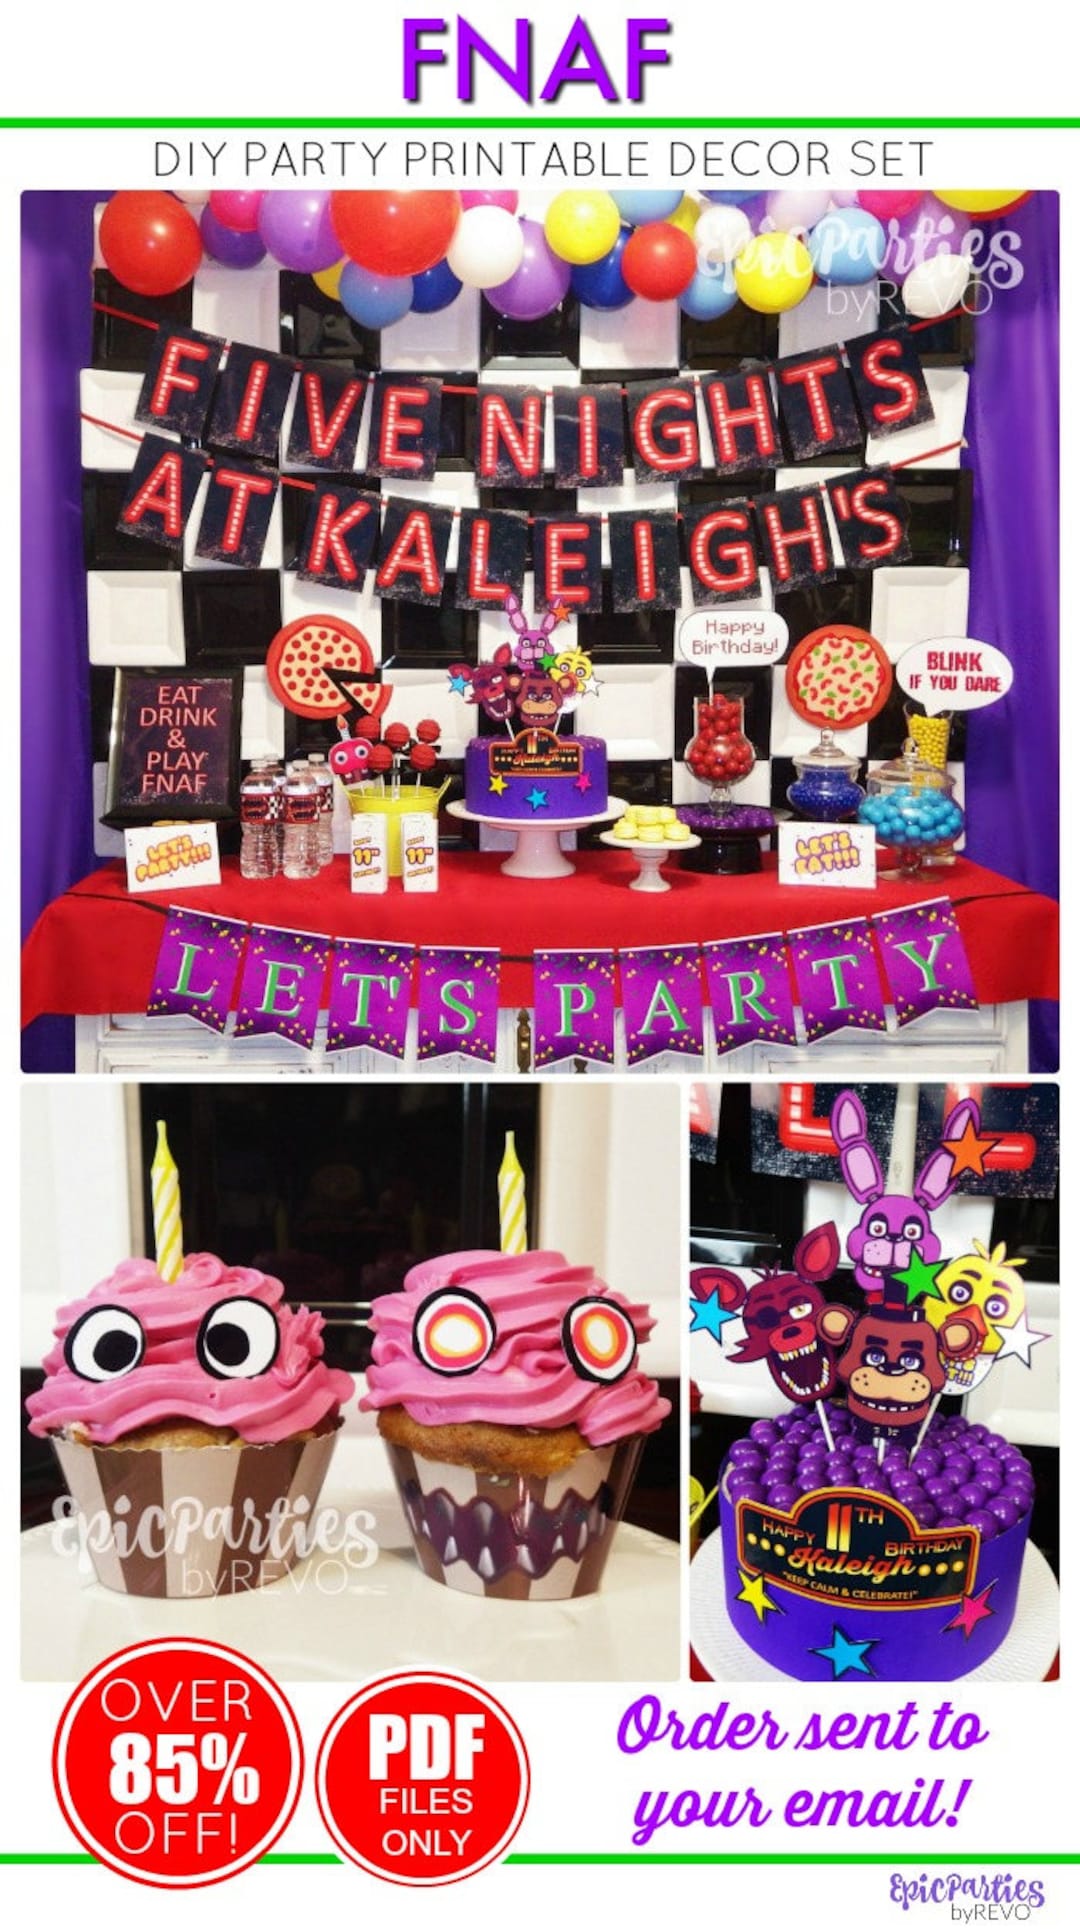 Heidaman Five Nights At Freddy's Birthday Party Supplies Fnaf Birthday  Decorations Freddy Frostbear Party Decorations Set Include Banners